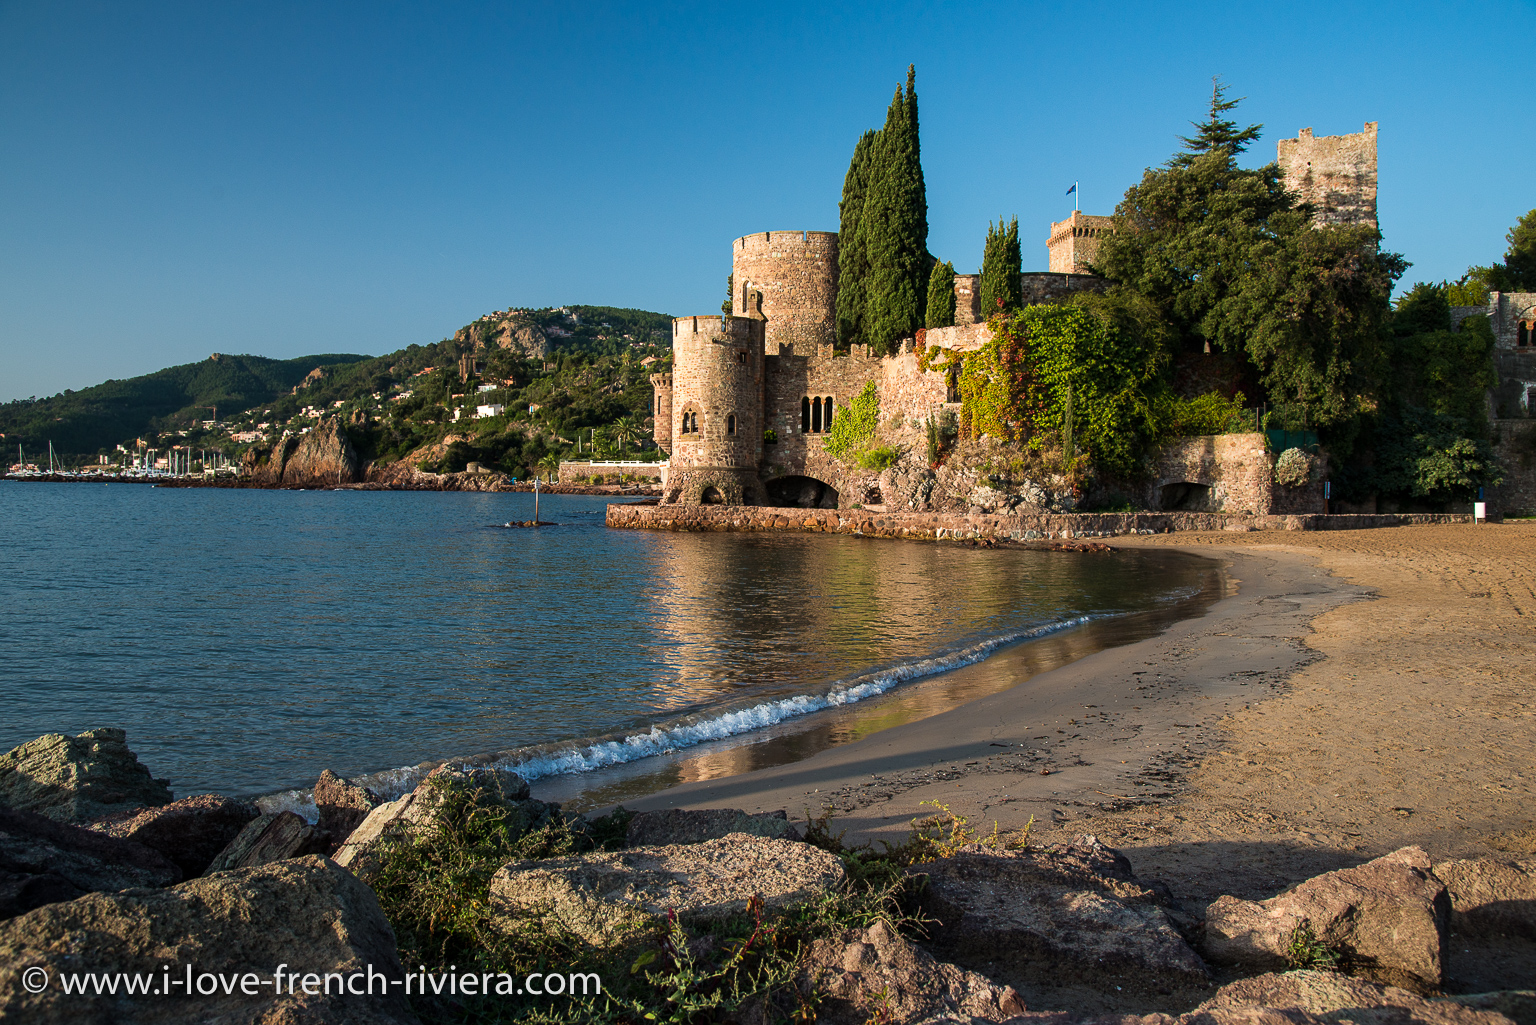 The beach and the famous medieval castle of La Napoule are just in front of our apartment. Picture taken in the morning at 08:30.